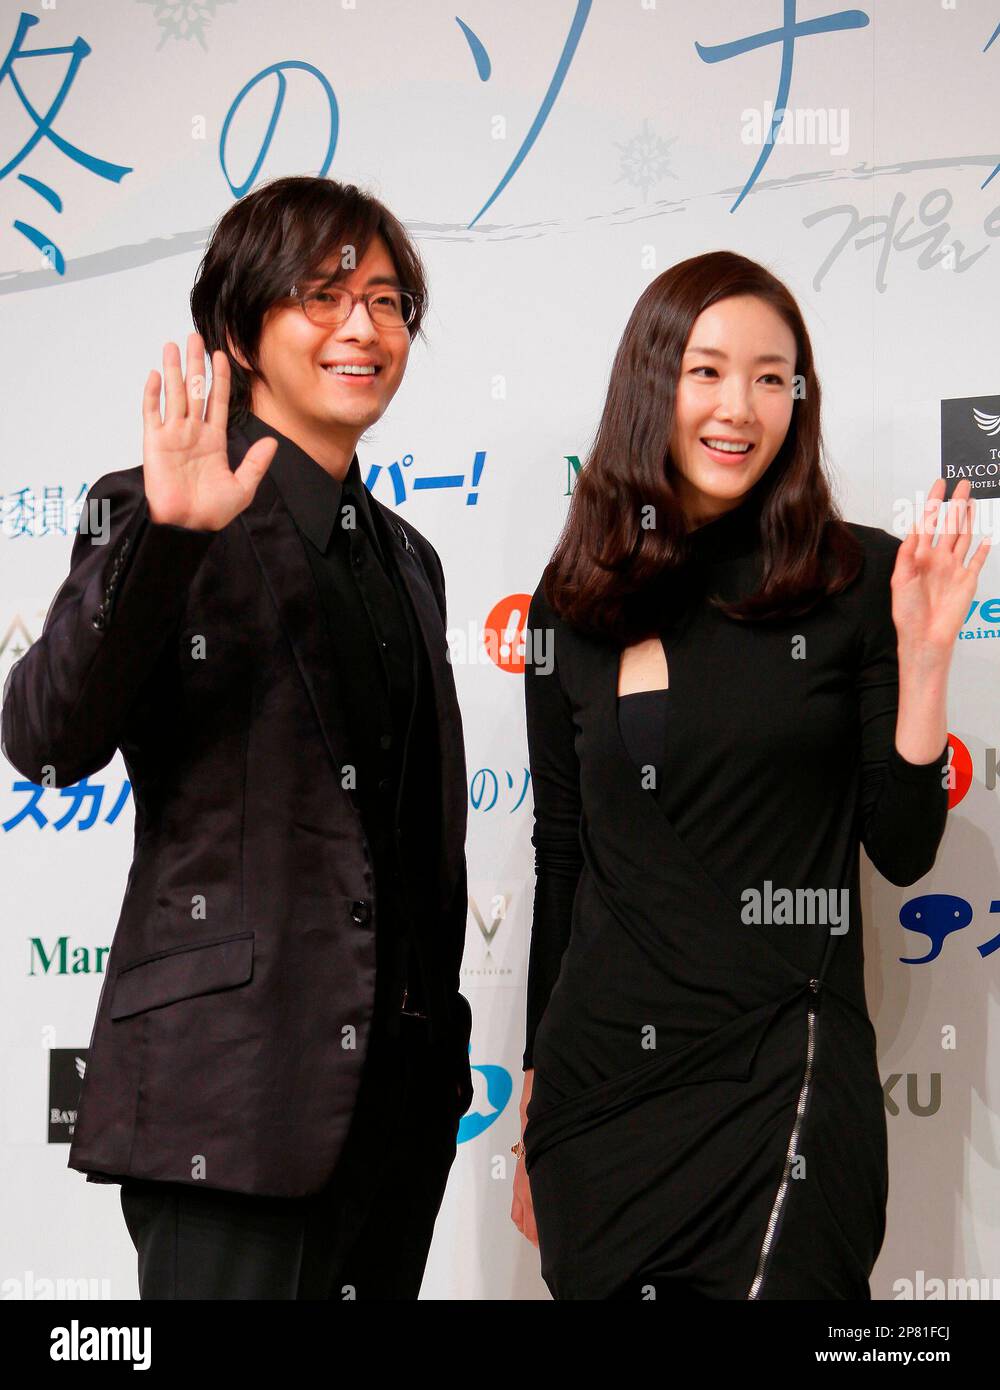 South Korean actor Bae Yong-joon, left, and actress Choi Ji-woo pose for Japanese media during a news conference to promote the animation version of their popular TV drama 'Winter Sonata' in Tokyo, Japan, Tuesday, Sept. 29, 2009. (AP Photo/Itsuo Inouye) Stock Photo